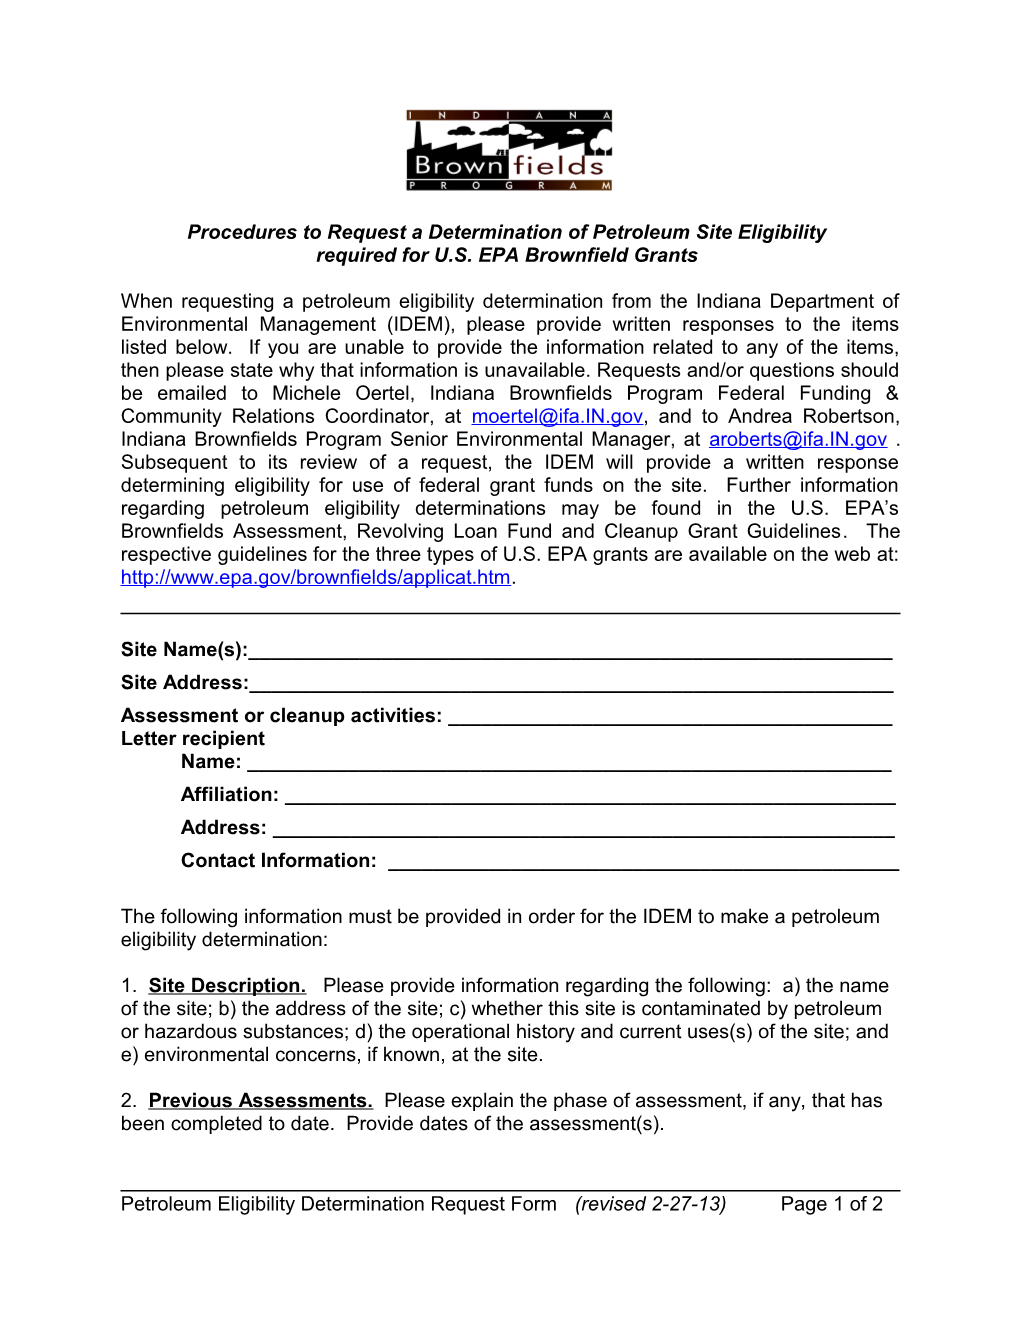 Procedures for the Submittal of Petroleum Site Eligibility Requests As Required by The